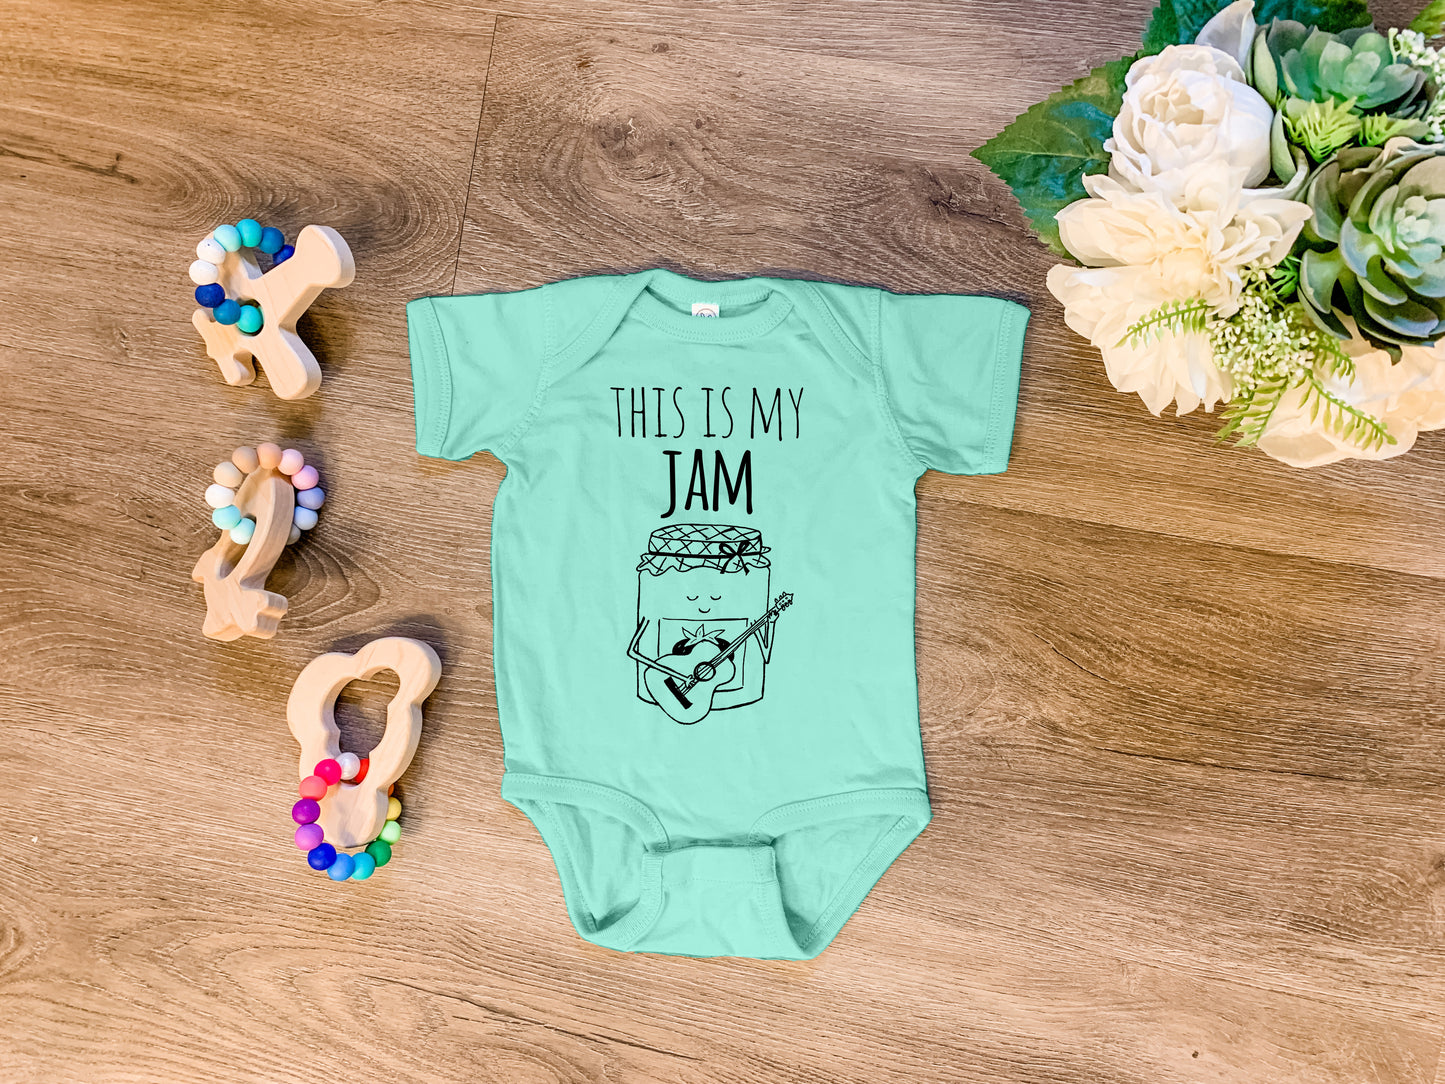 This Is My Jam - Onesie - Heather Gray, Chill, or Lavender